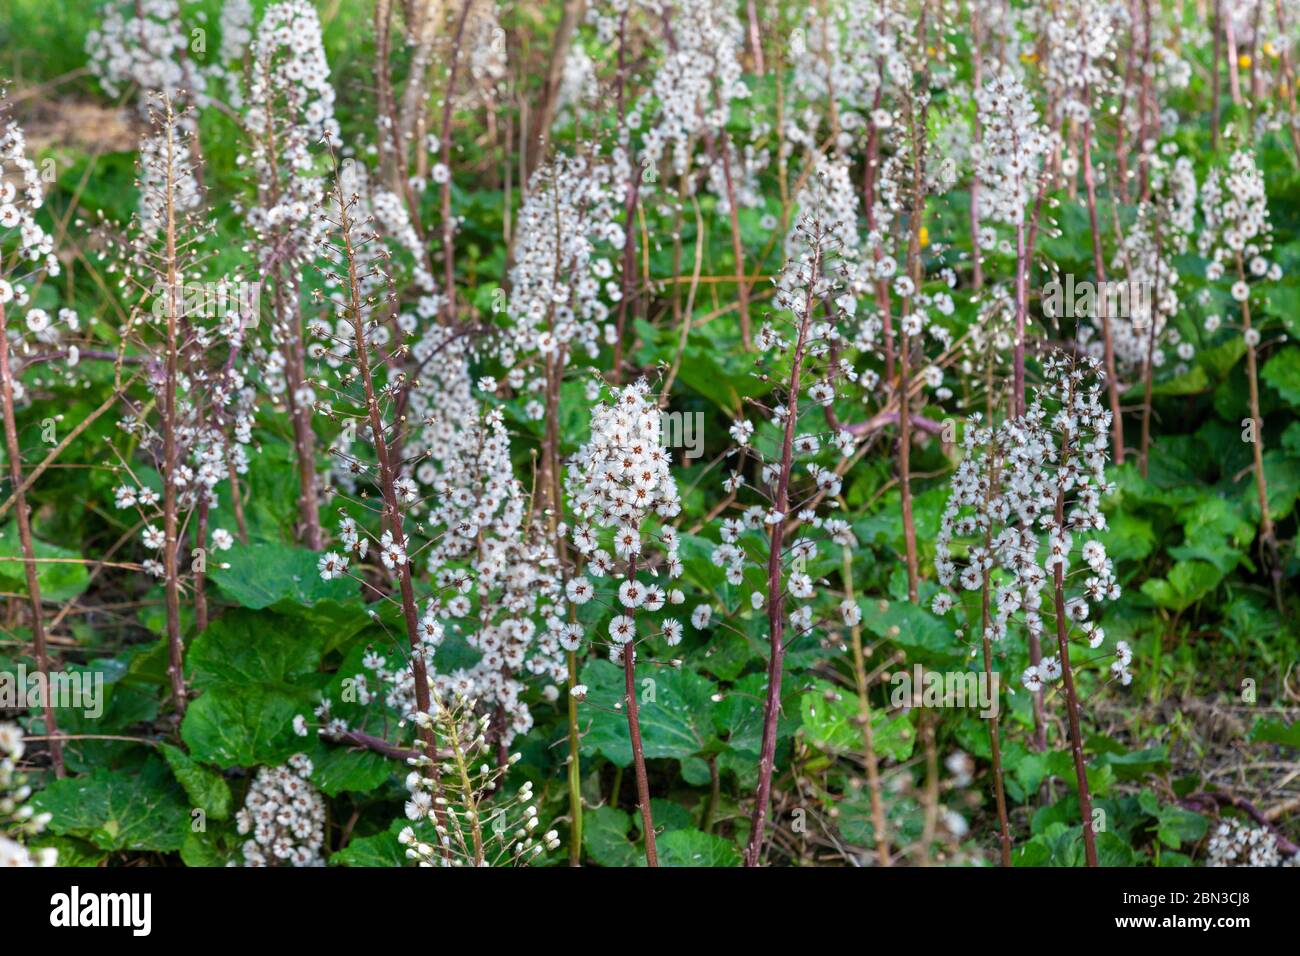 The flowers of Petasites hybridus, the butterbur on the bank of stream bank Stock Photo